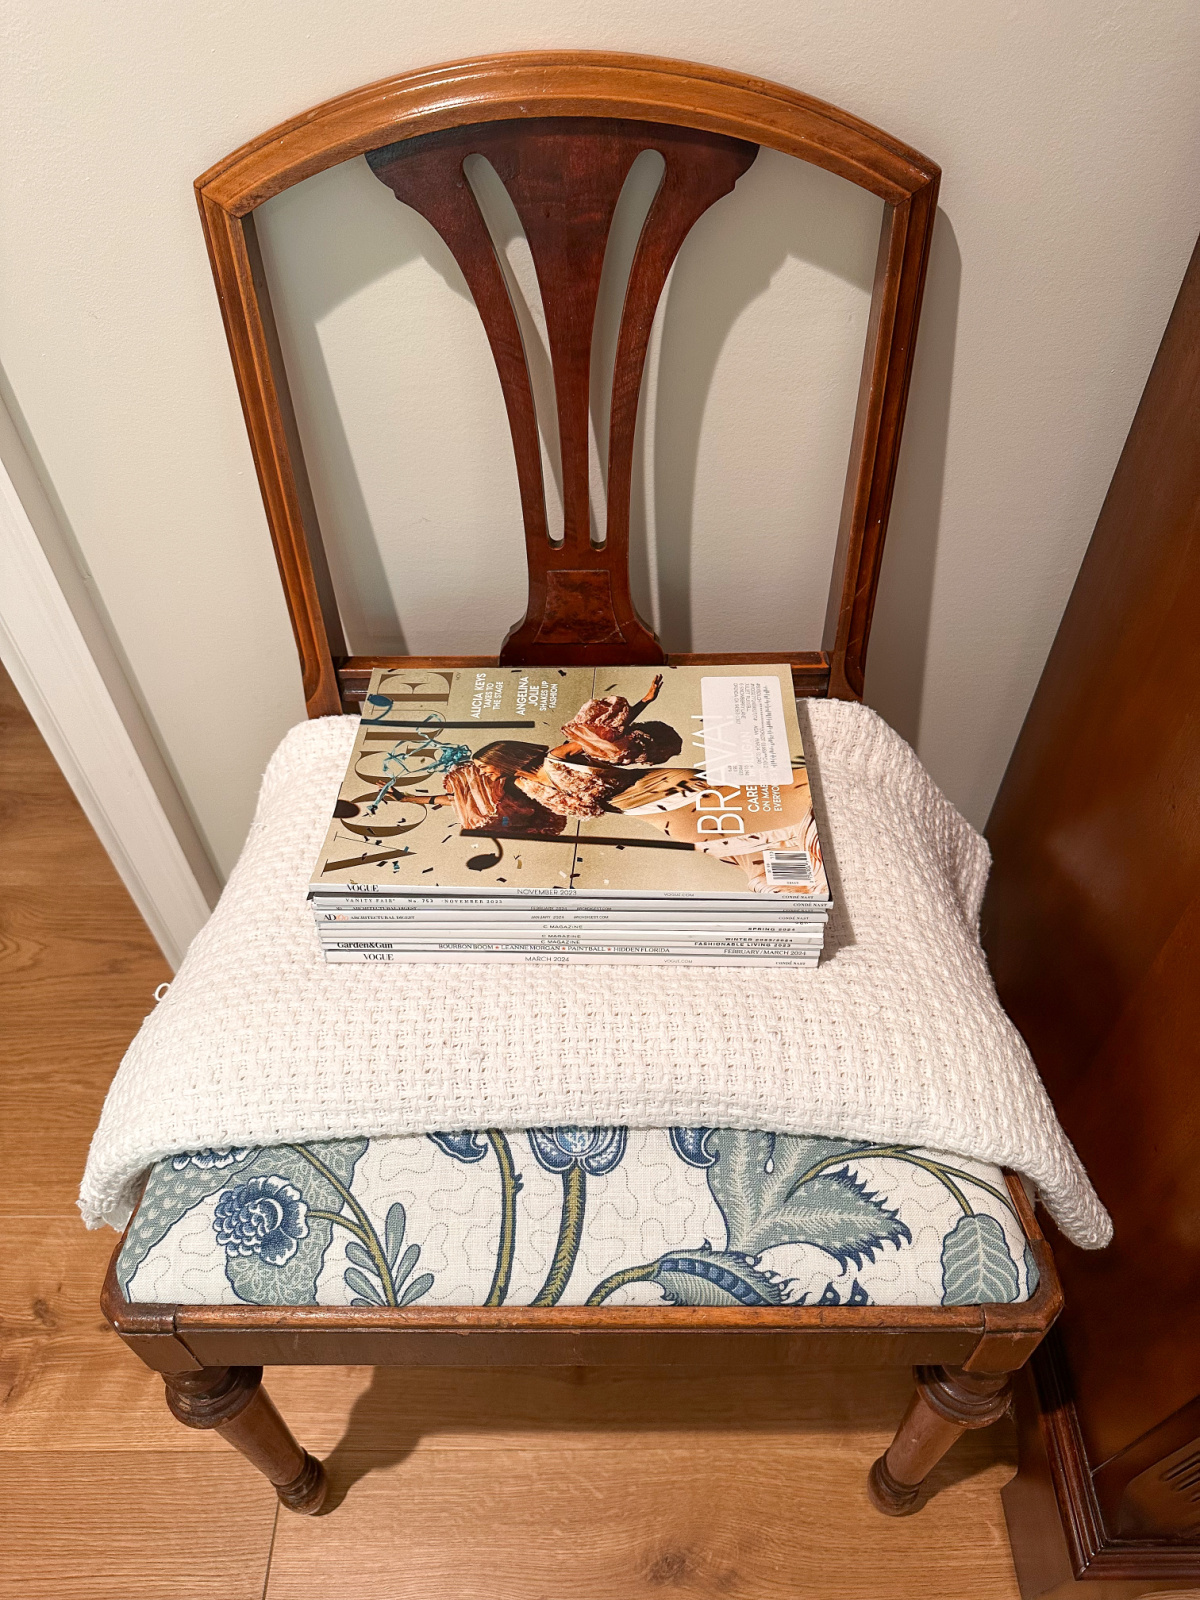 Old dining chair with throw blanket and magazines in seat.